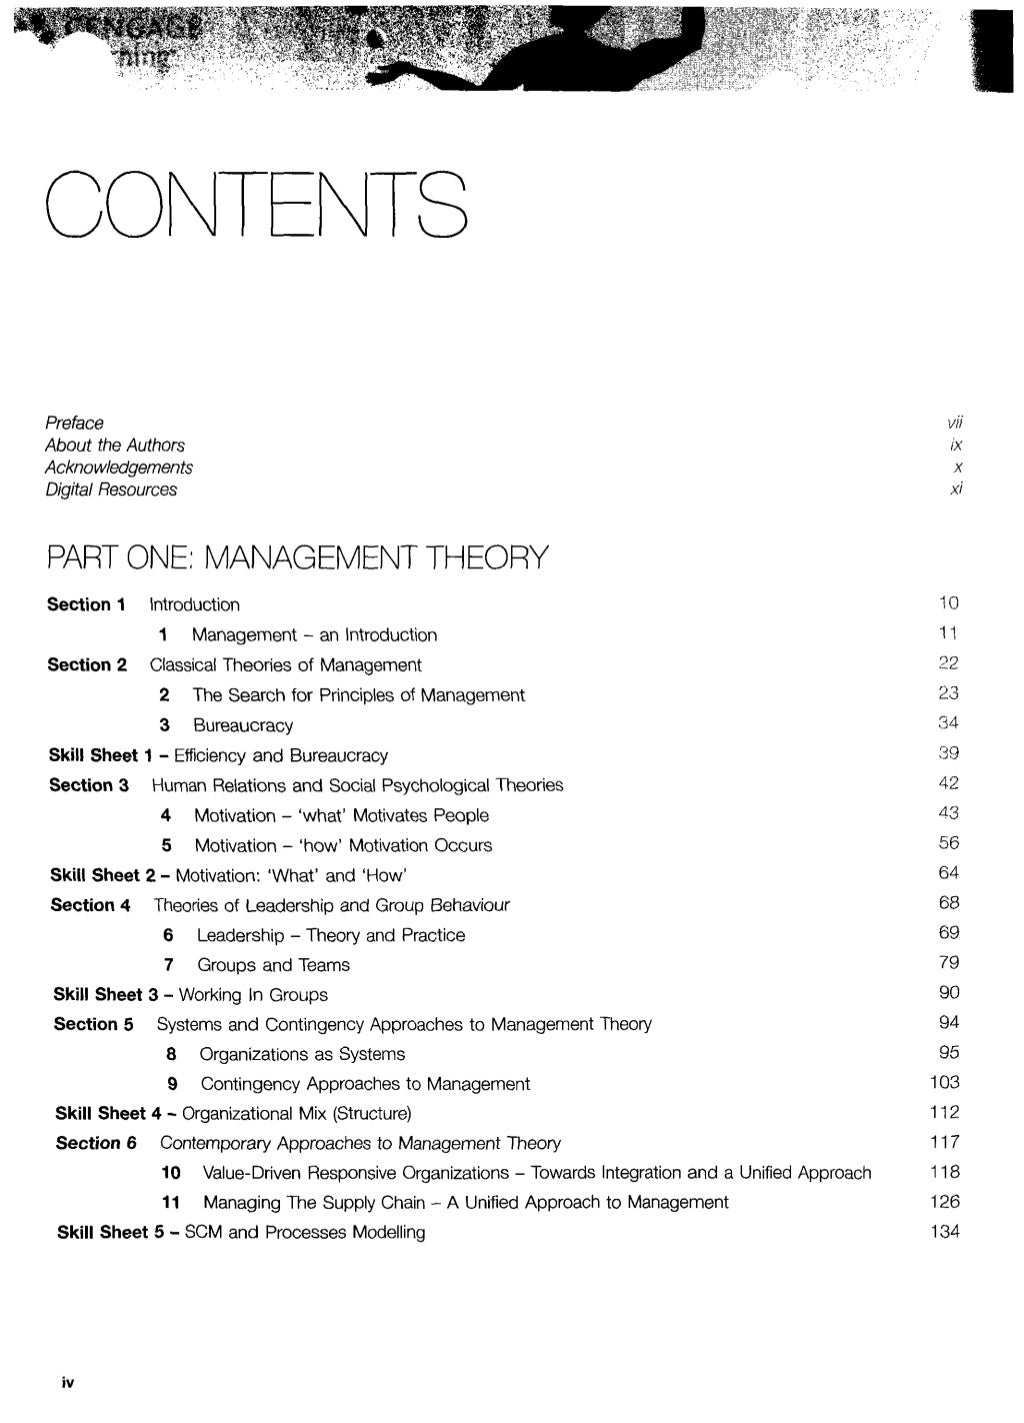 case study management theory and practice